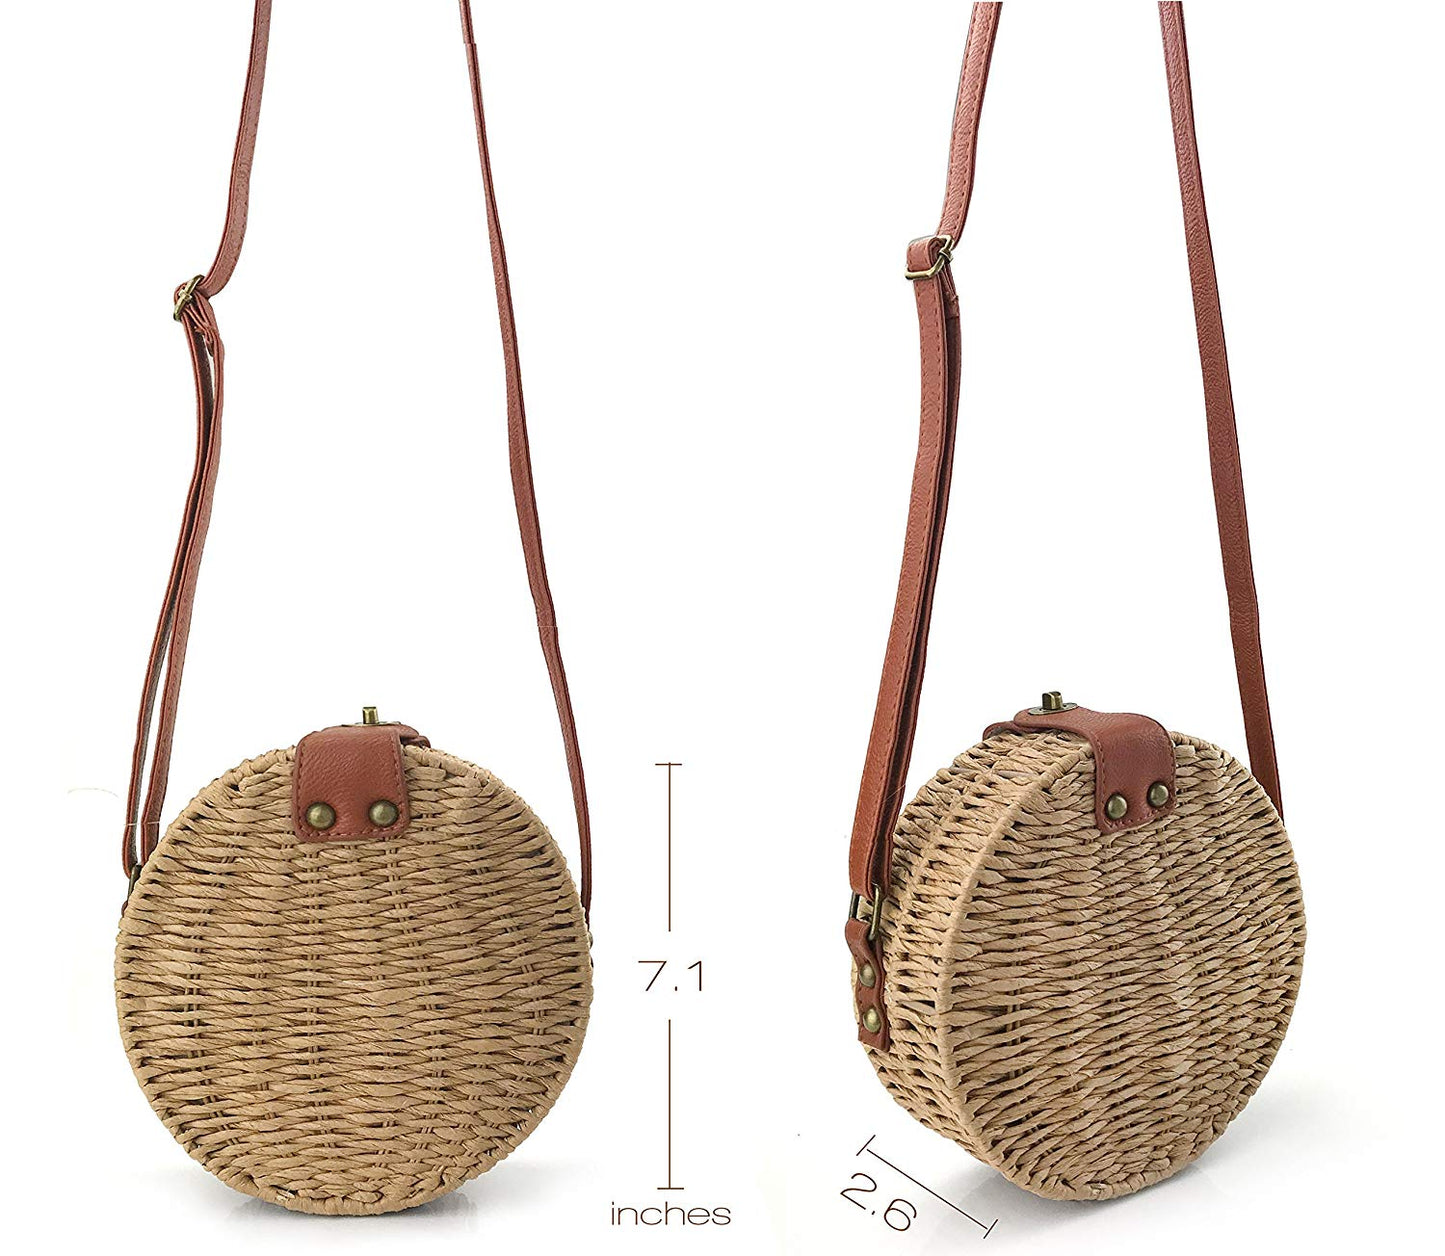 Round Straw Handwoven Shoulder Bag Women Cross body Bag for Summer Holiday - Hoxis Bags